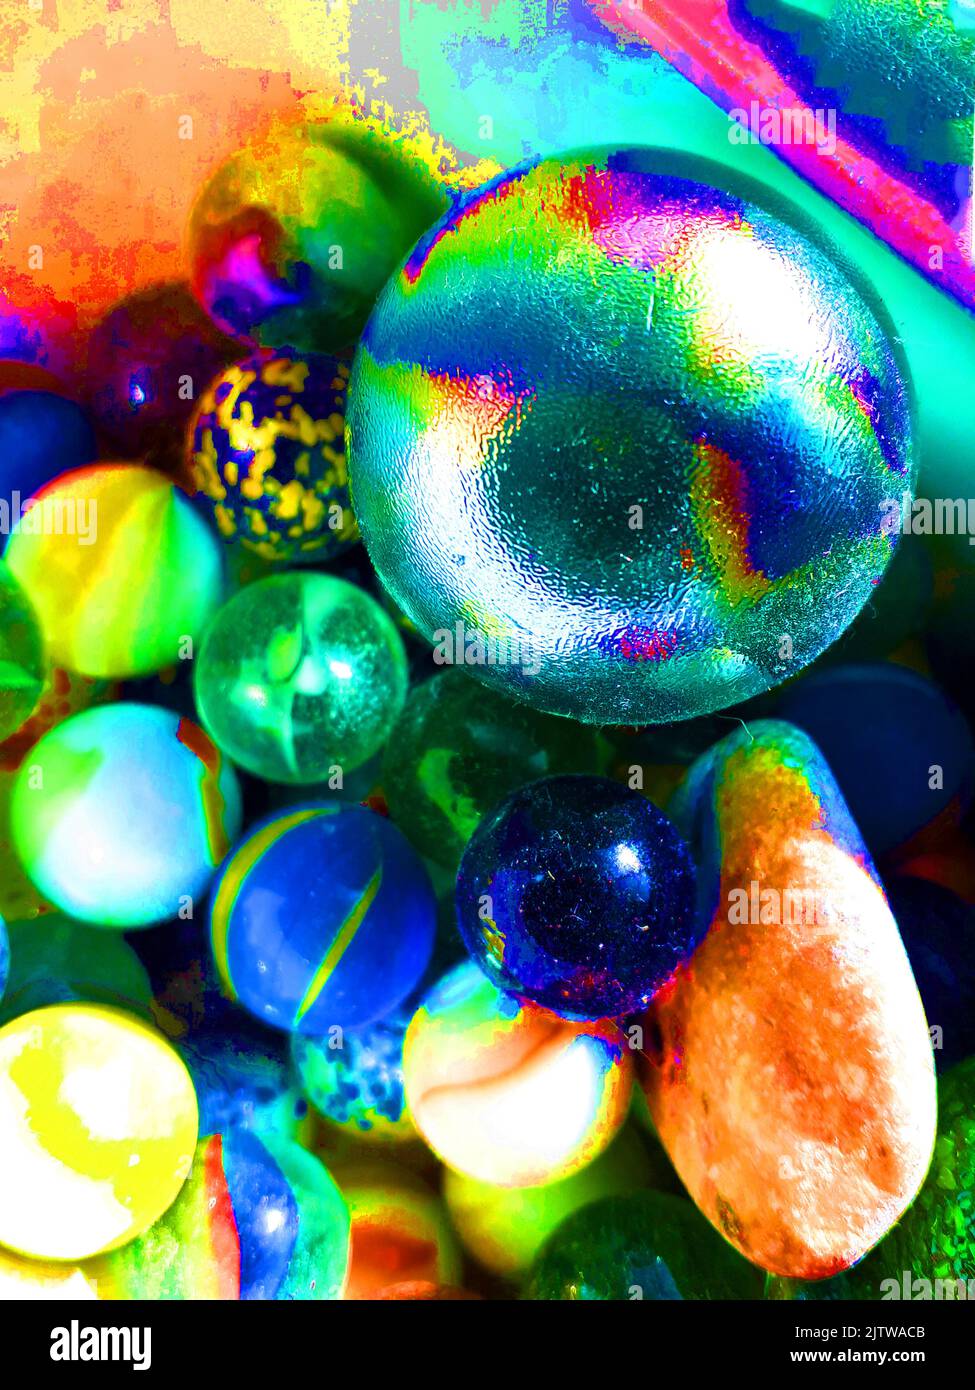 An assortment of glass balls in different sizes Stock Photo